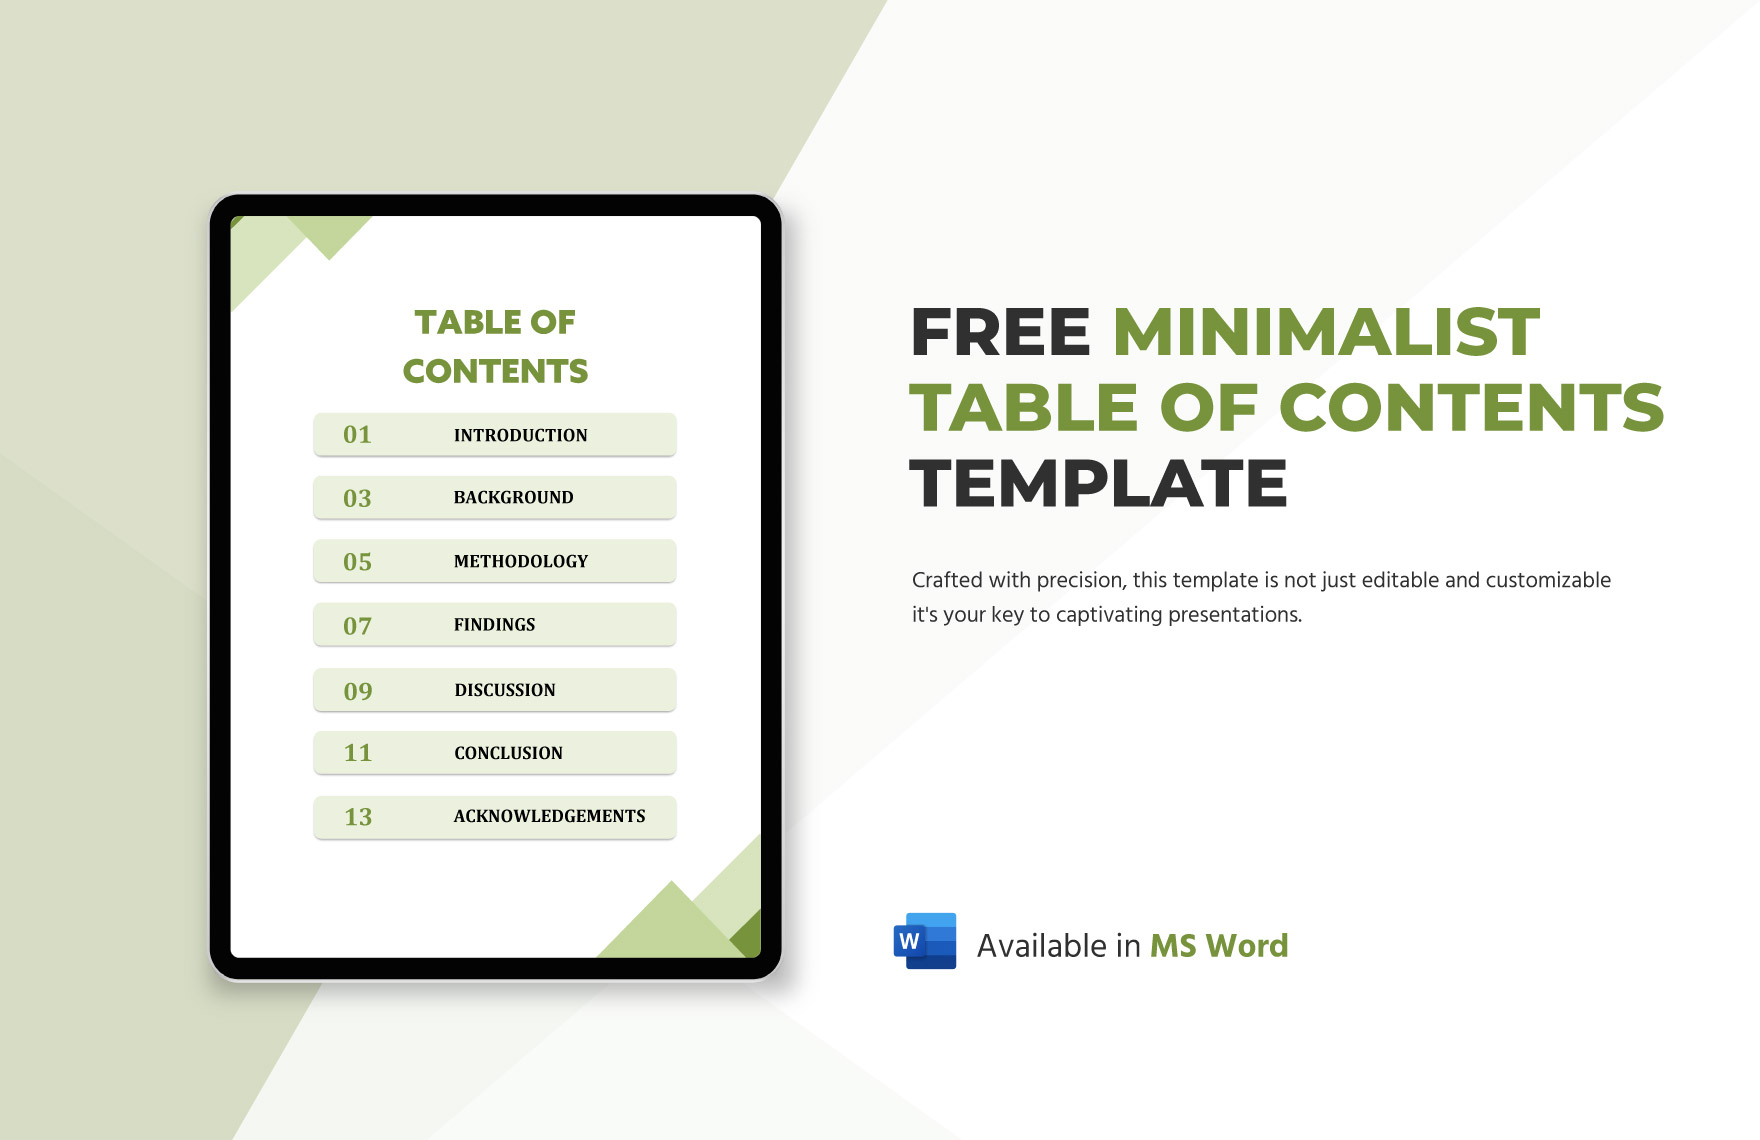 Minimalist Table of Contents Template